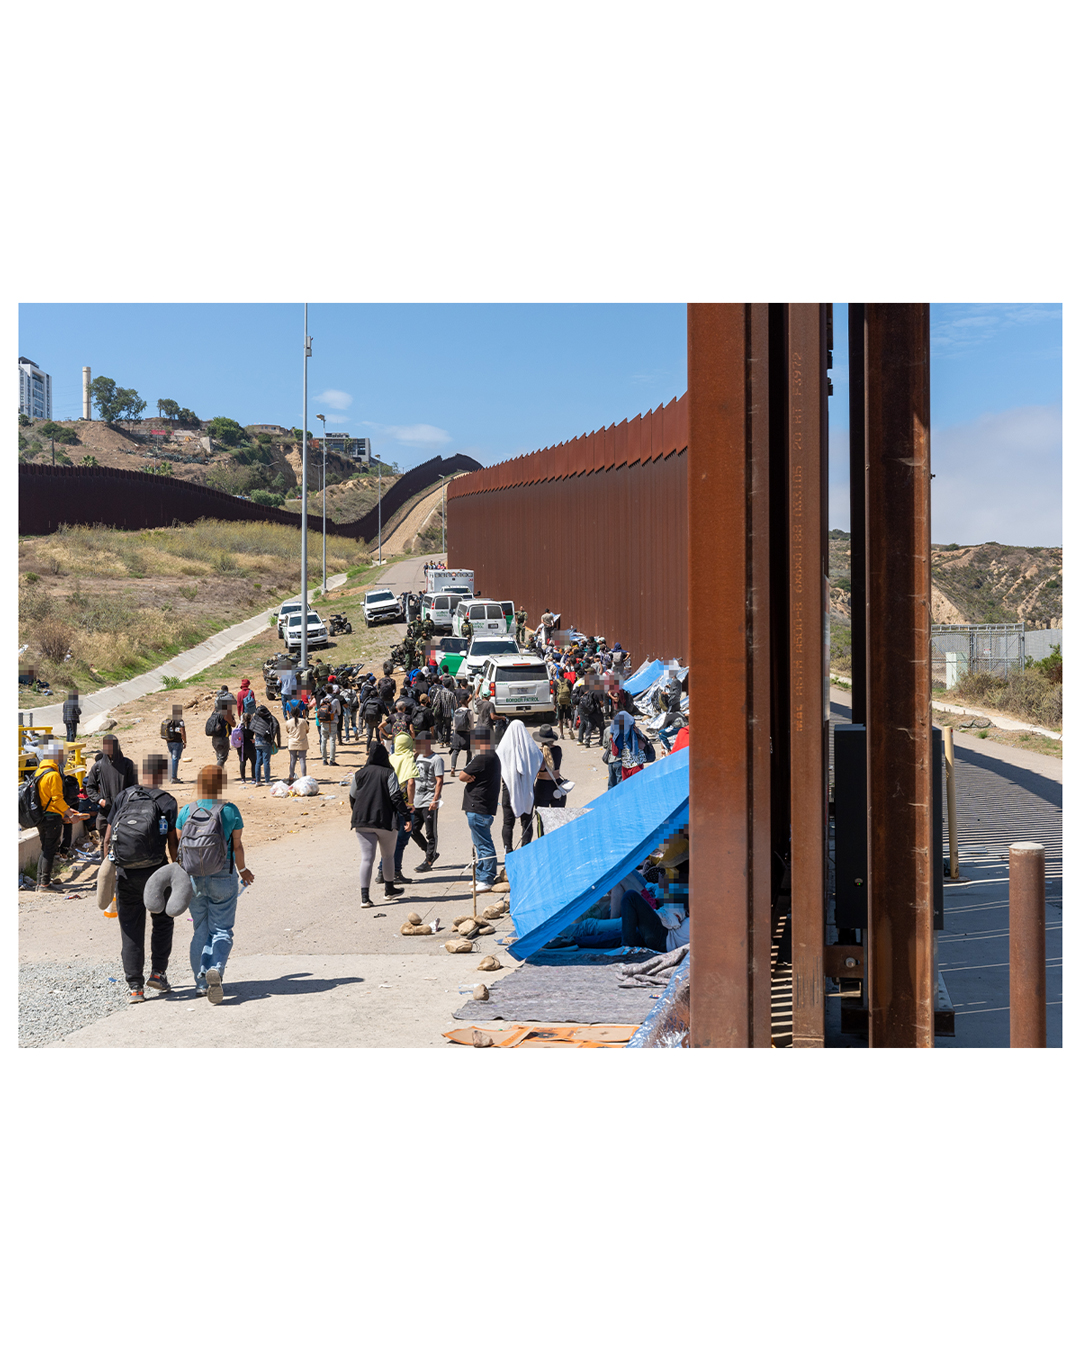 A large group of migrants gathers against the border wall. Some have set up tarps against the slats to shelter from the overhead sun. 7 border patrol vehicles can be seen at the top of the lane, as well as several ATVs. The border patrol agents are noticeably distanced from the migrant population.